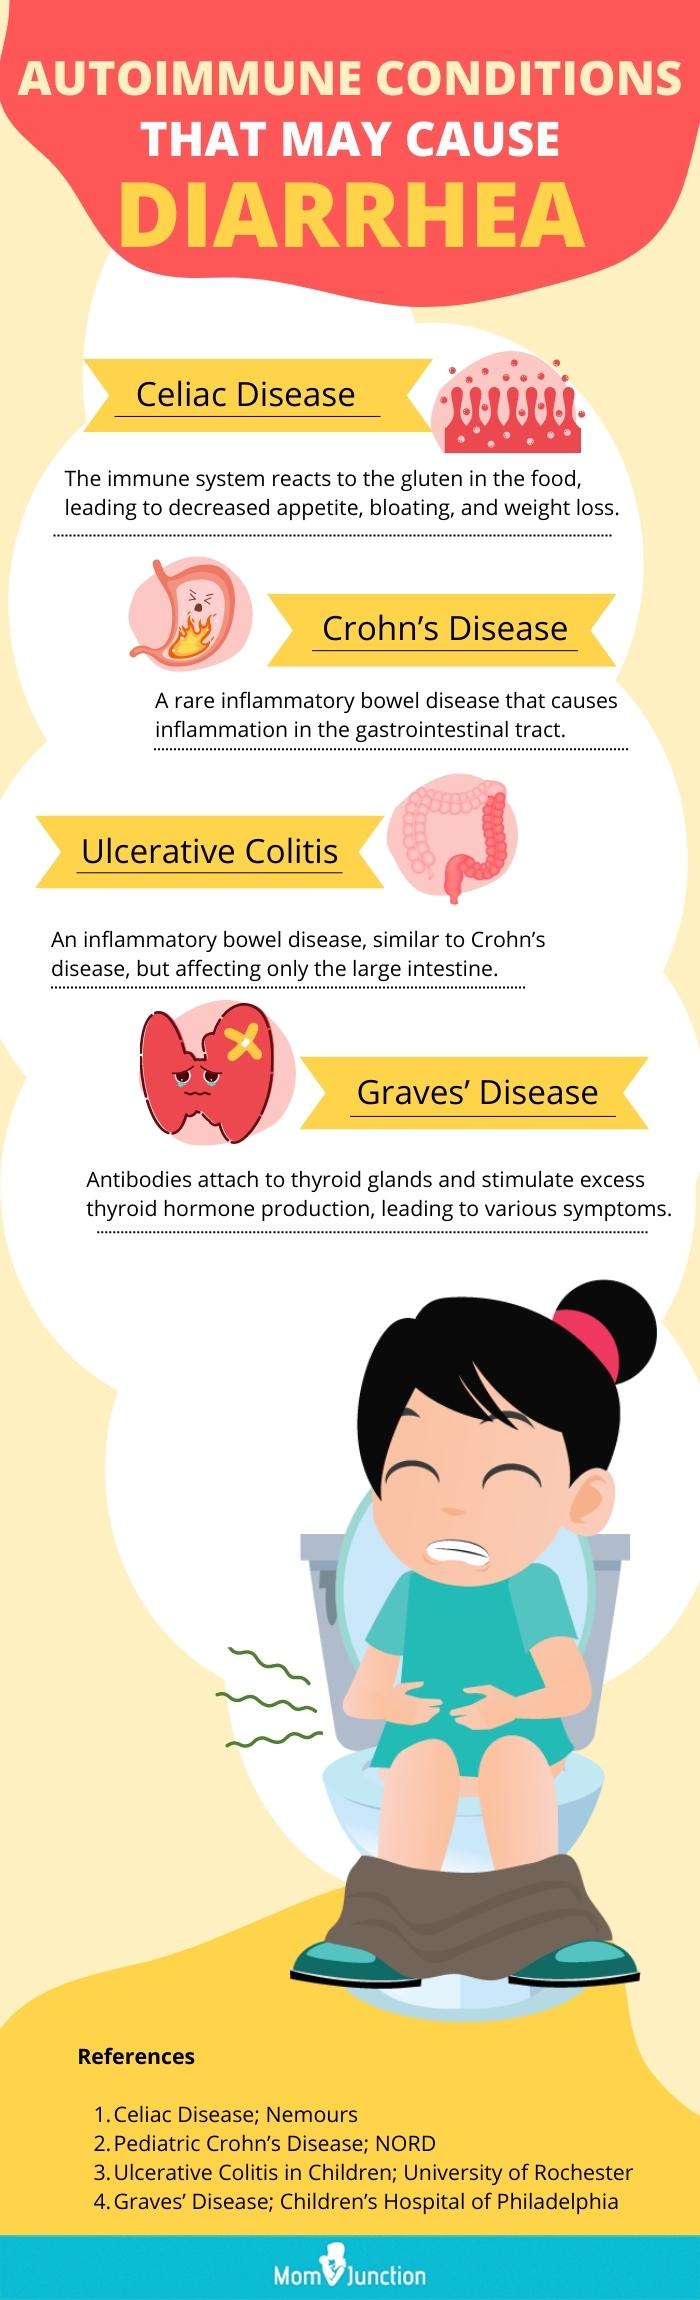 autoimmune conditions that may cause diarrhea (infographic)